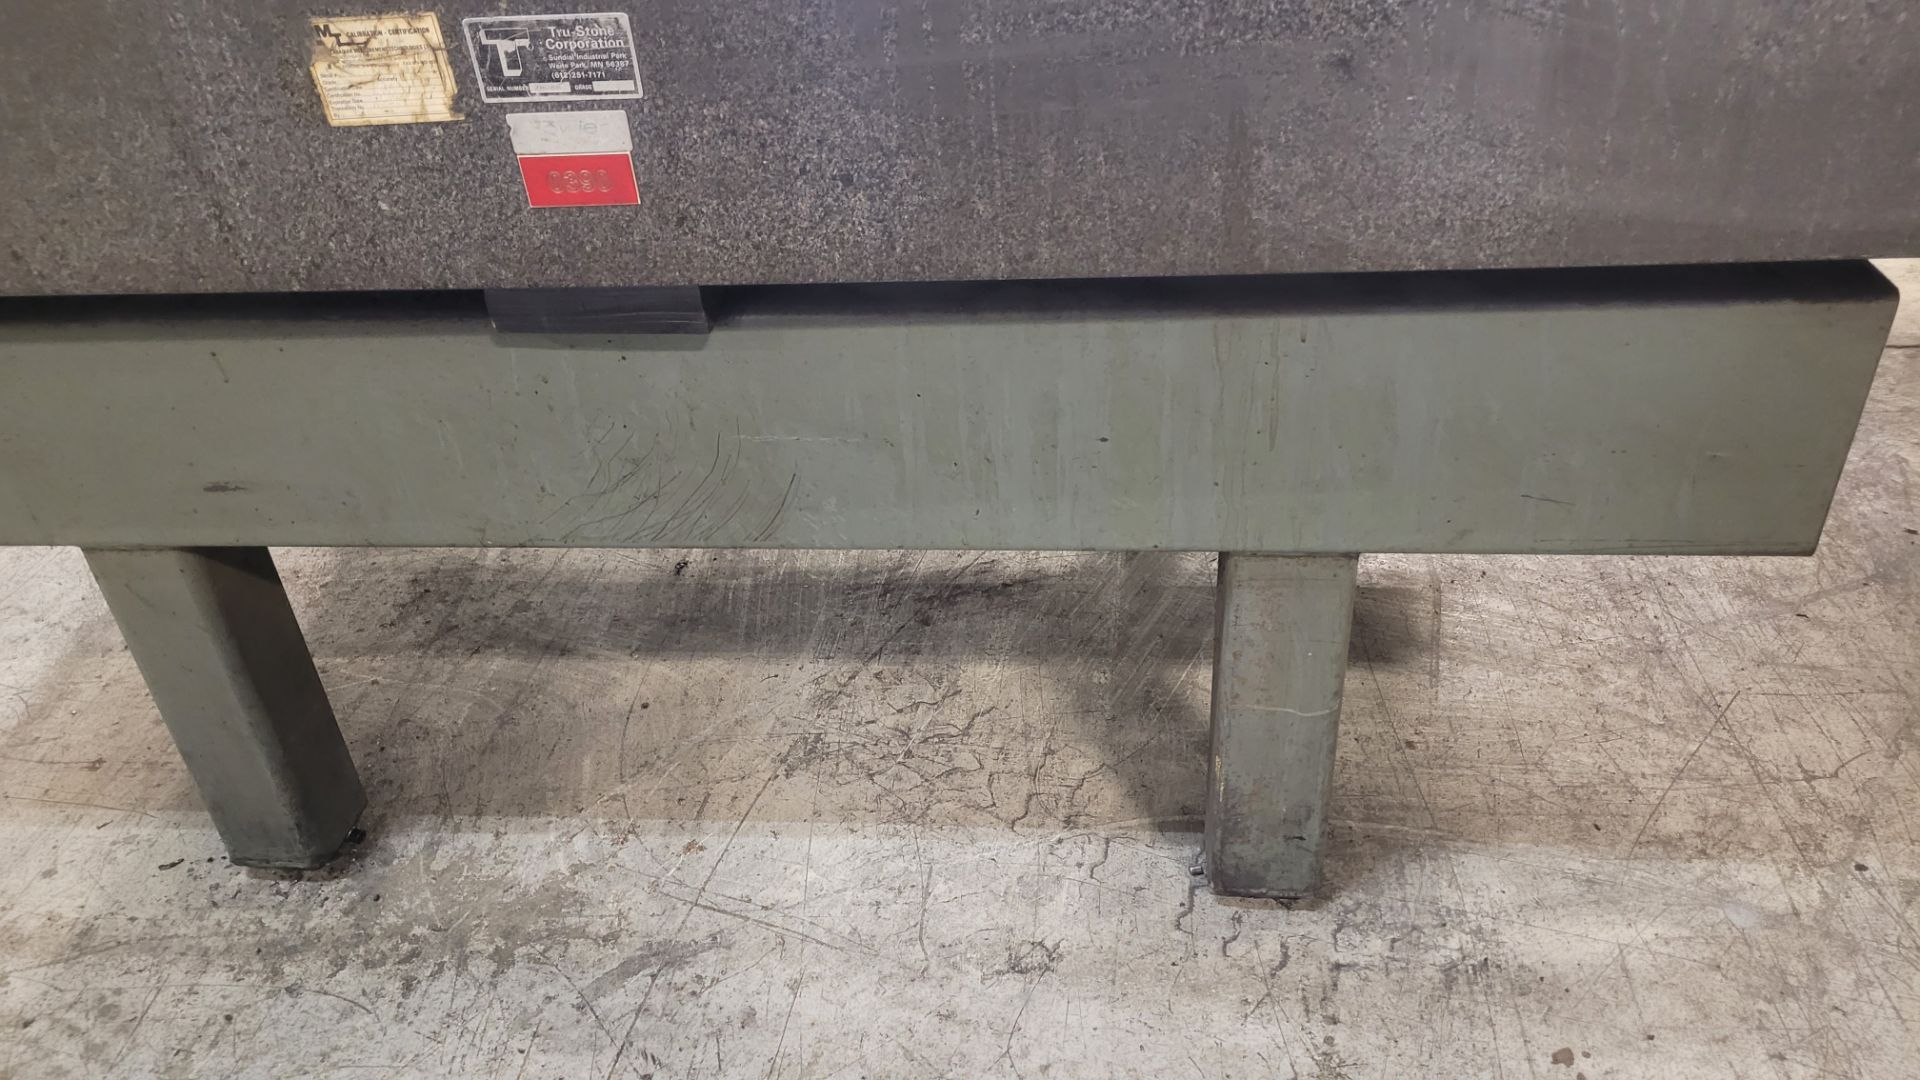 TRU-STONE CORPORATION APPROX. 10" X 48" X 72" GRANITE SURFACE PLATE ON STAND (RIGGING FEE $45) - Image 3 of 5